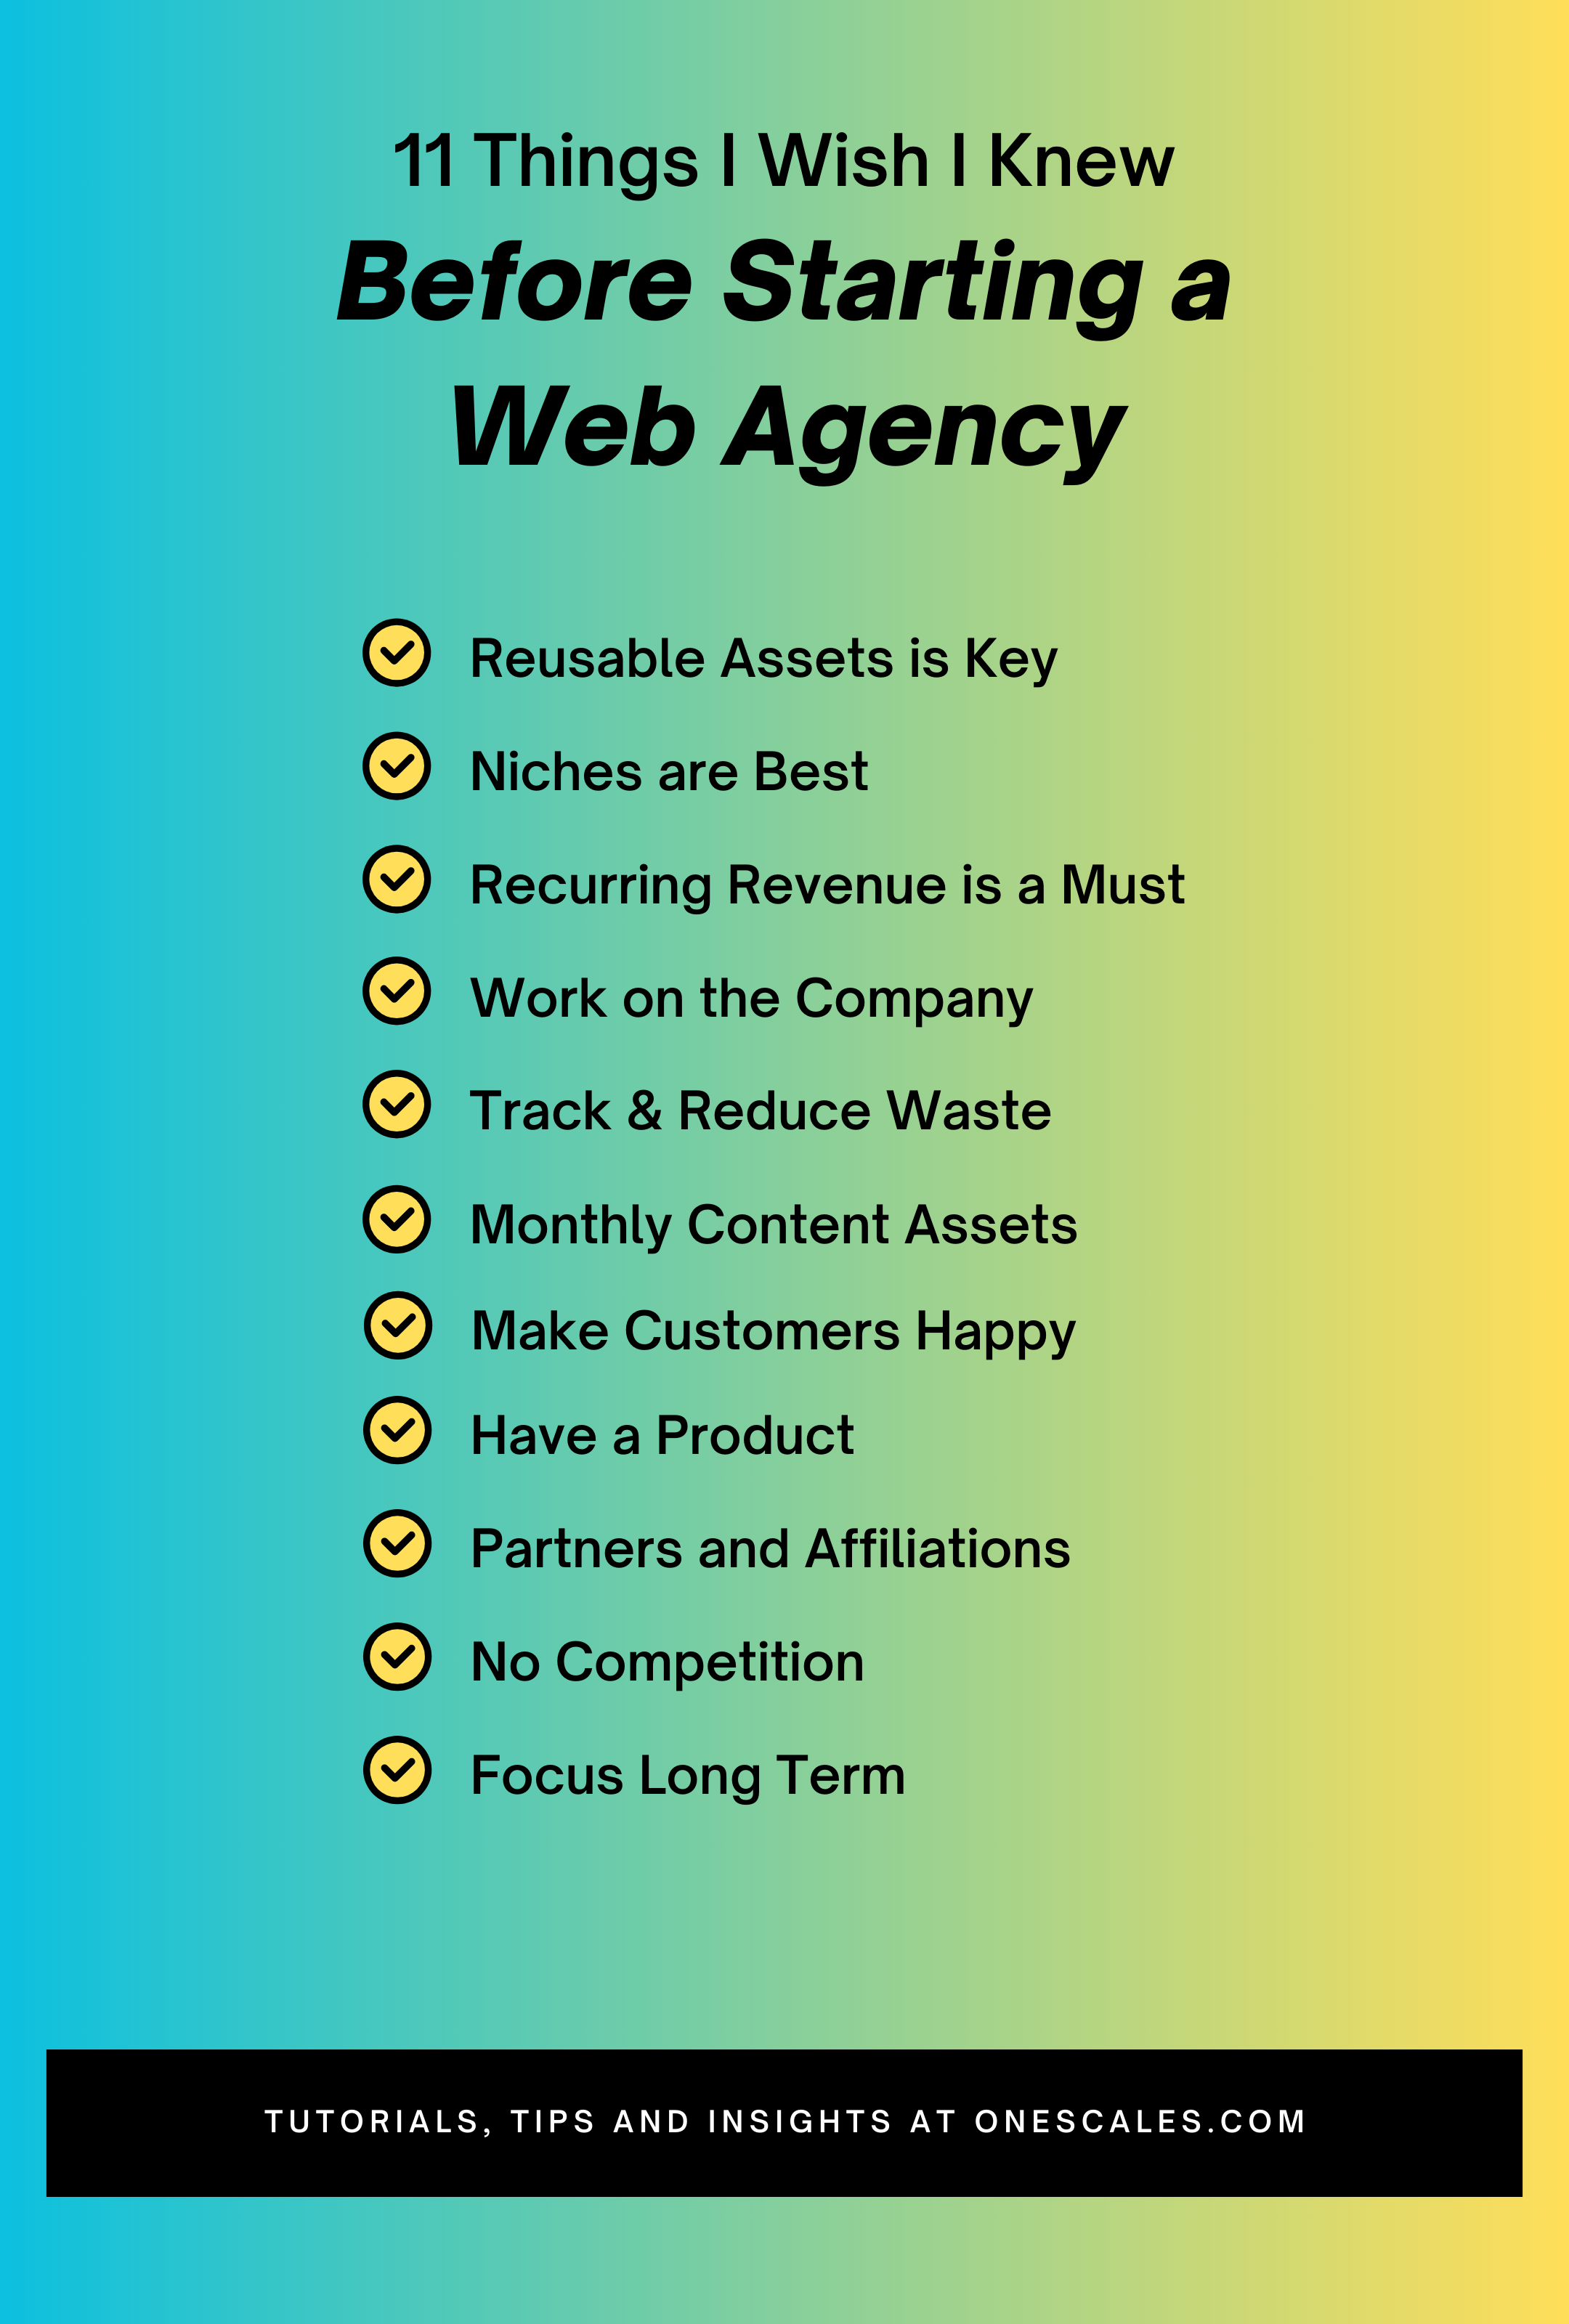 11 Things I Wish I Knew Before Starting a Web Agency